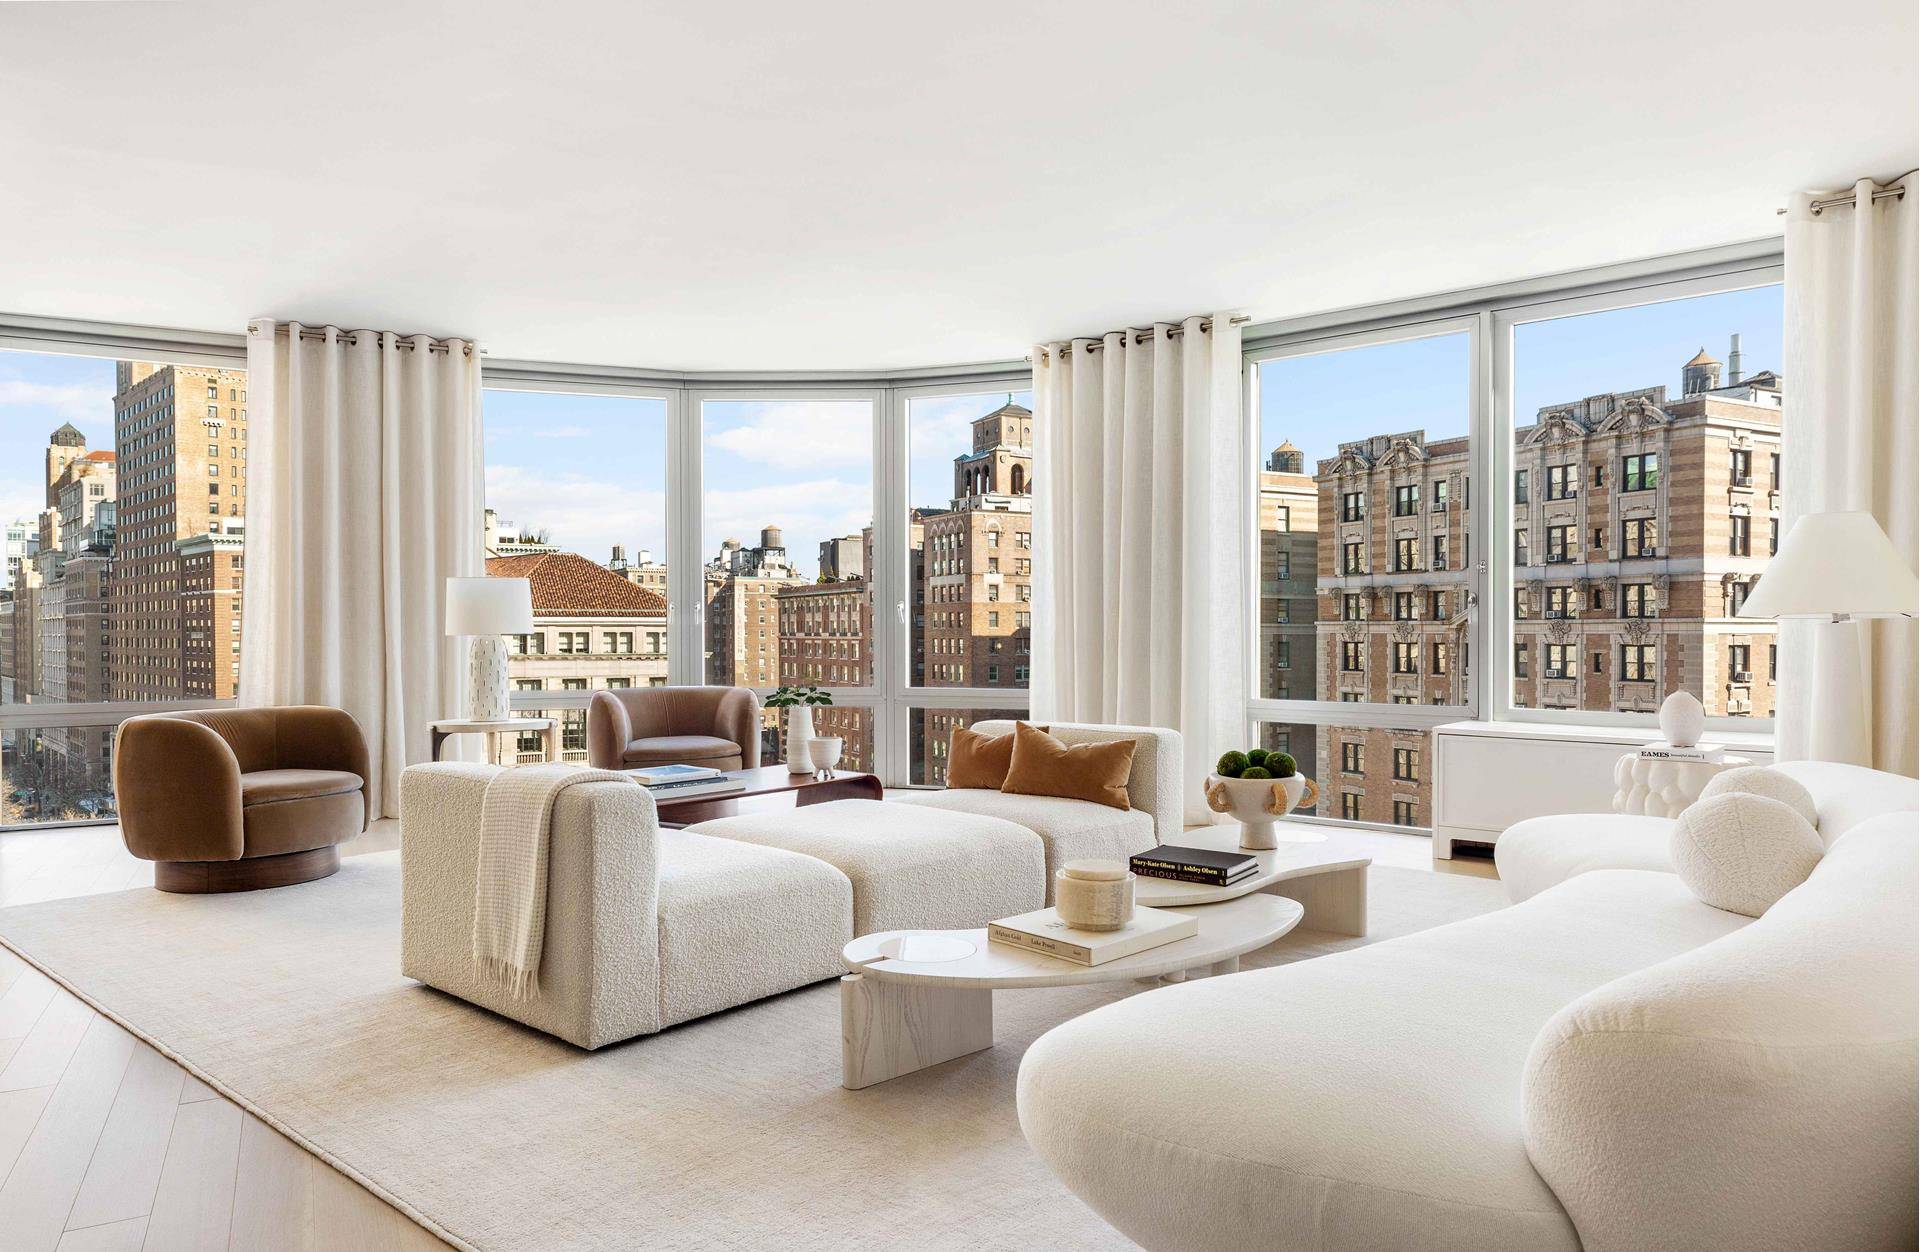 This beautiful, 4 bedroom, 4 and a half bathroom home showcases a private terrace and open views over the Upper West Side and beyond.